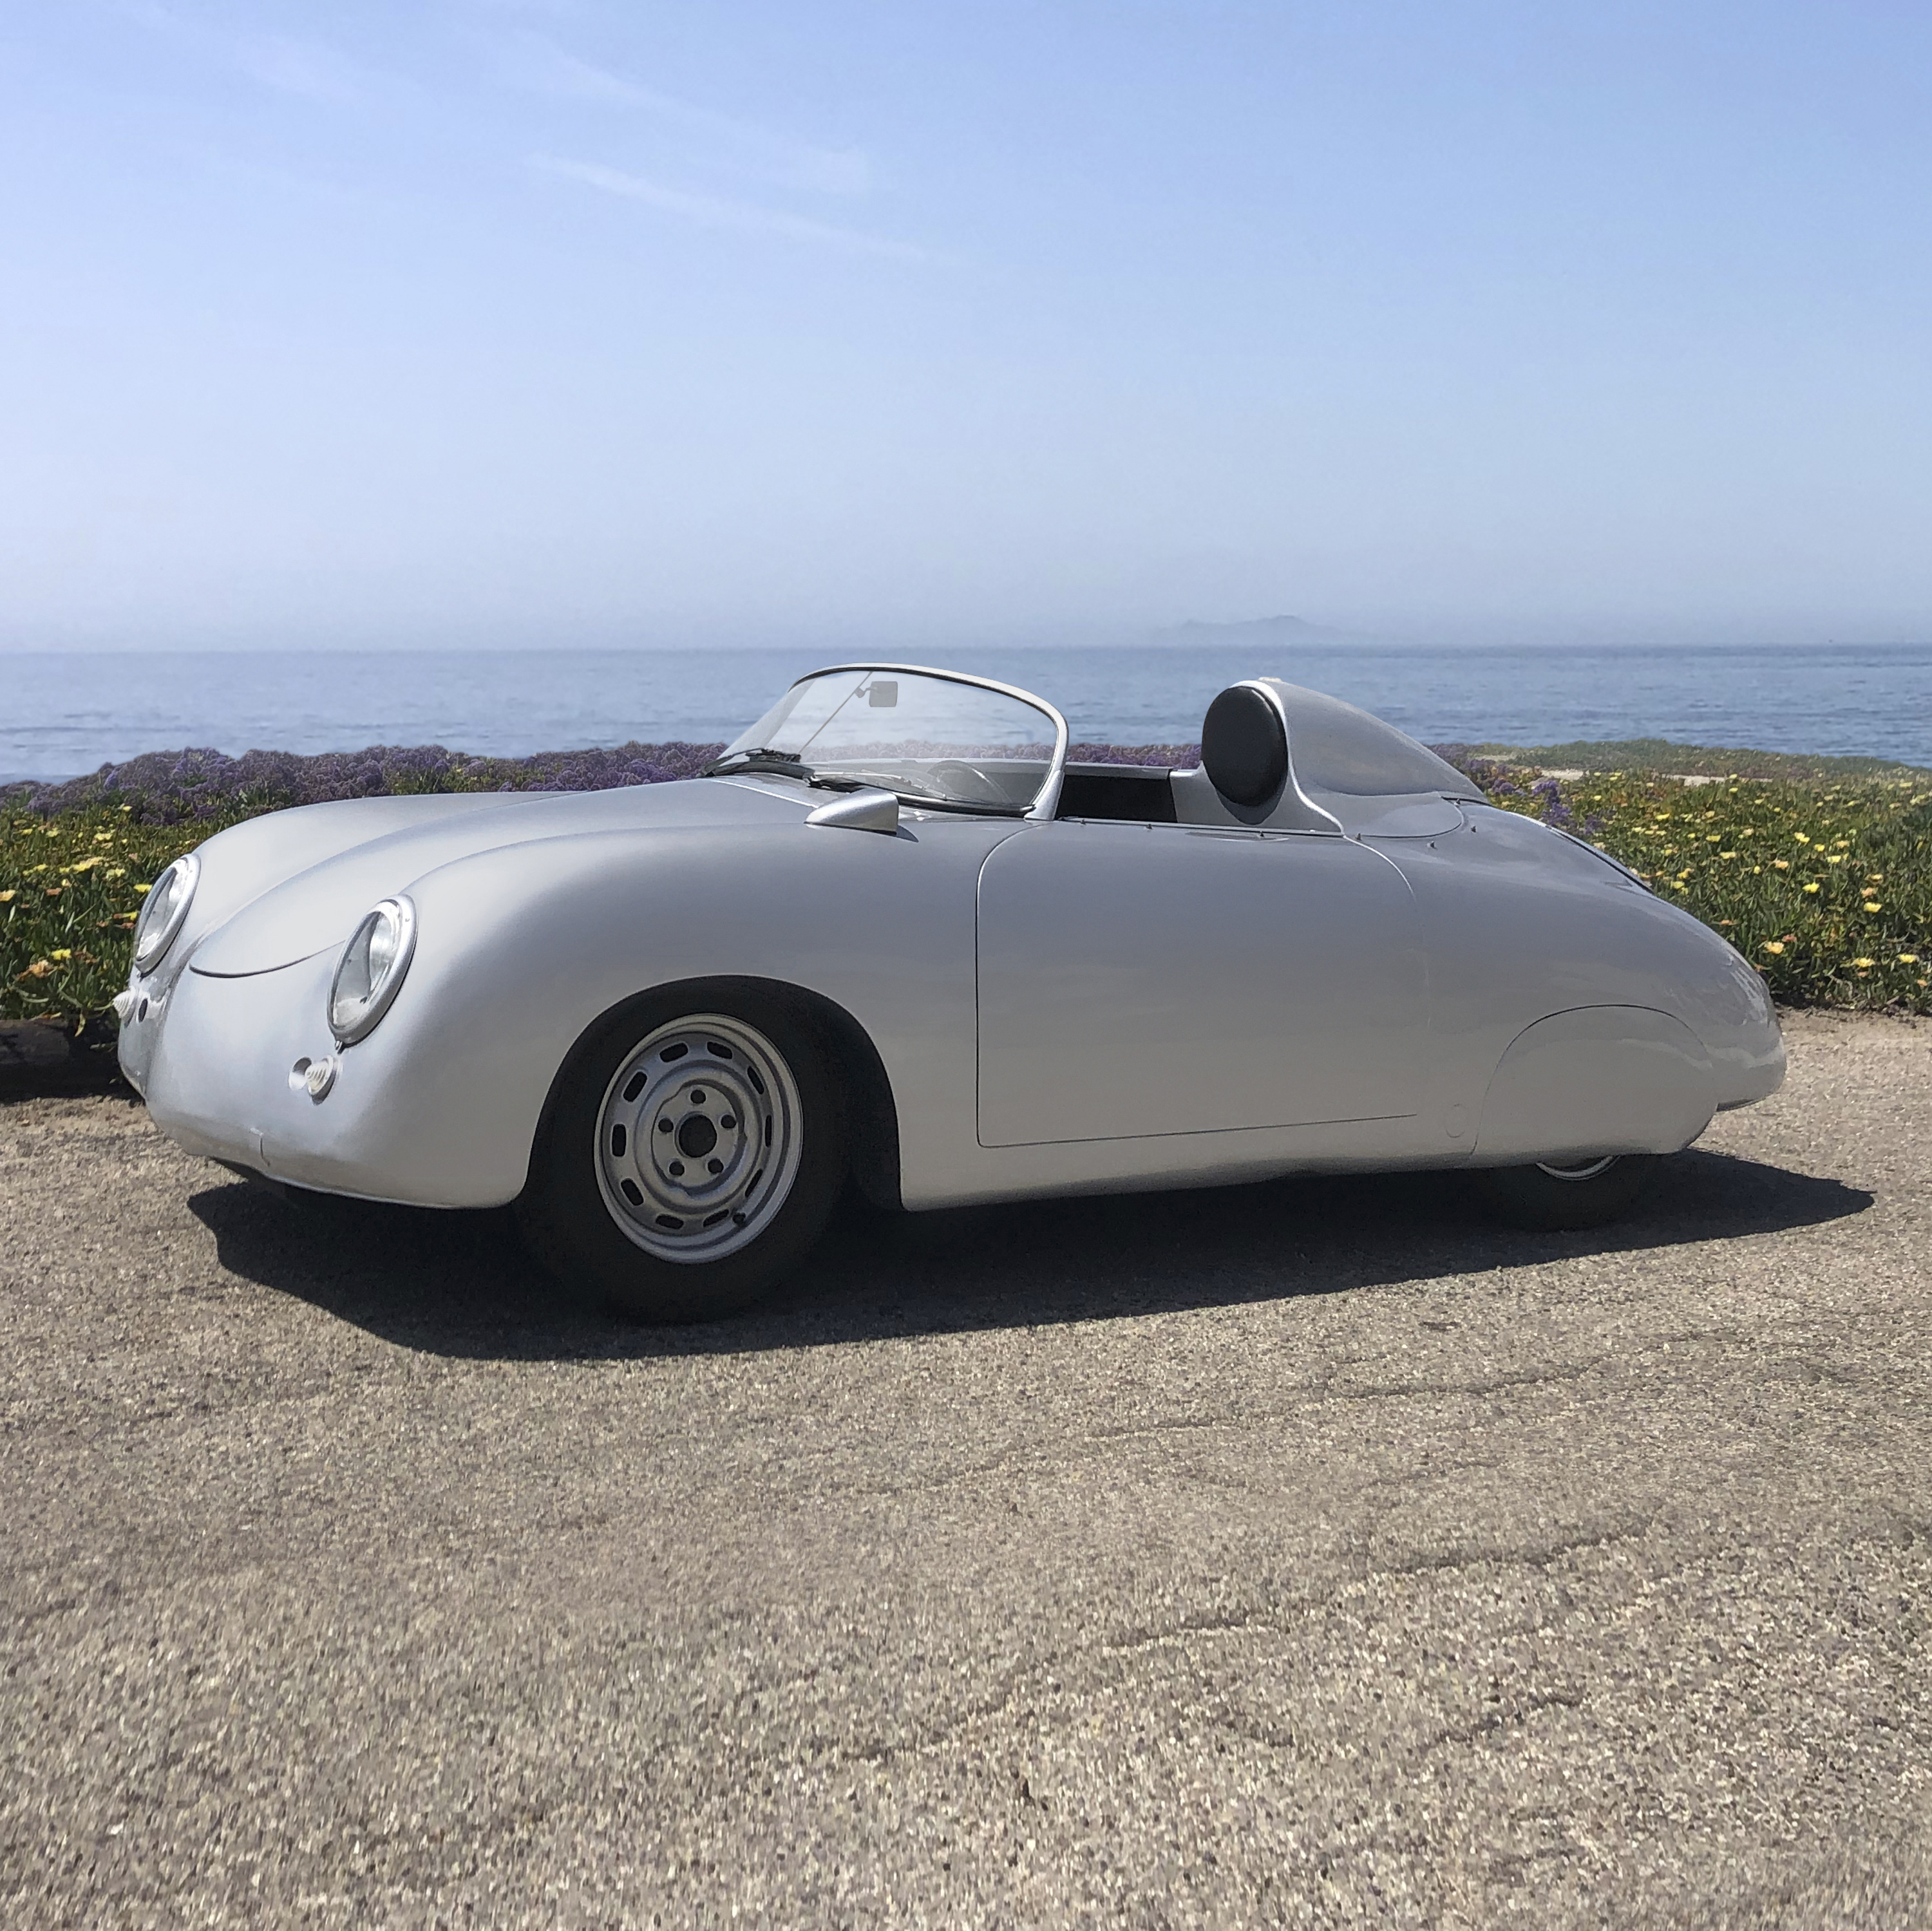 1956 Porsche 356 Speedster, modified by its owner, sculptor Robert Morris, est. $250,000-$350,000. Image courtesy of Rago/Wright/LAMA